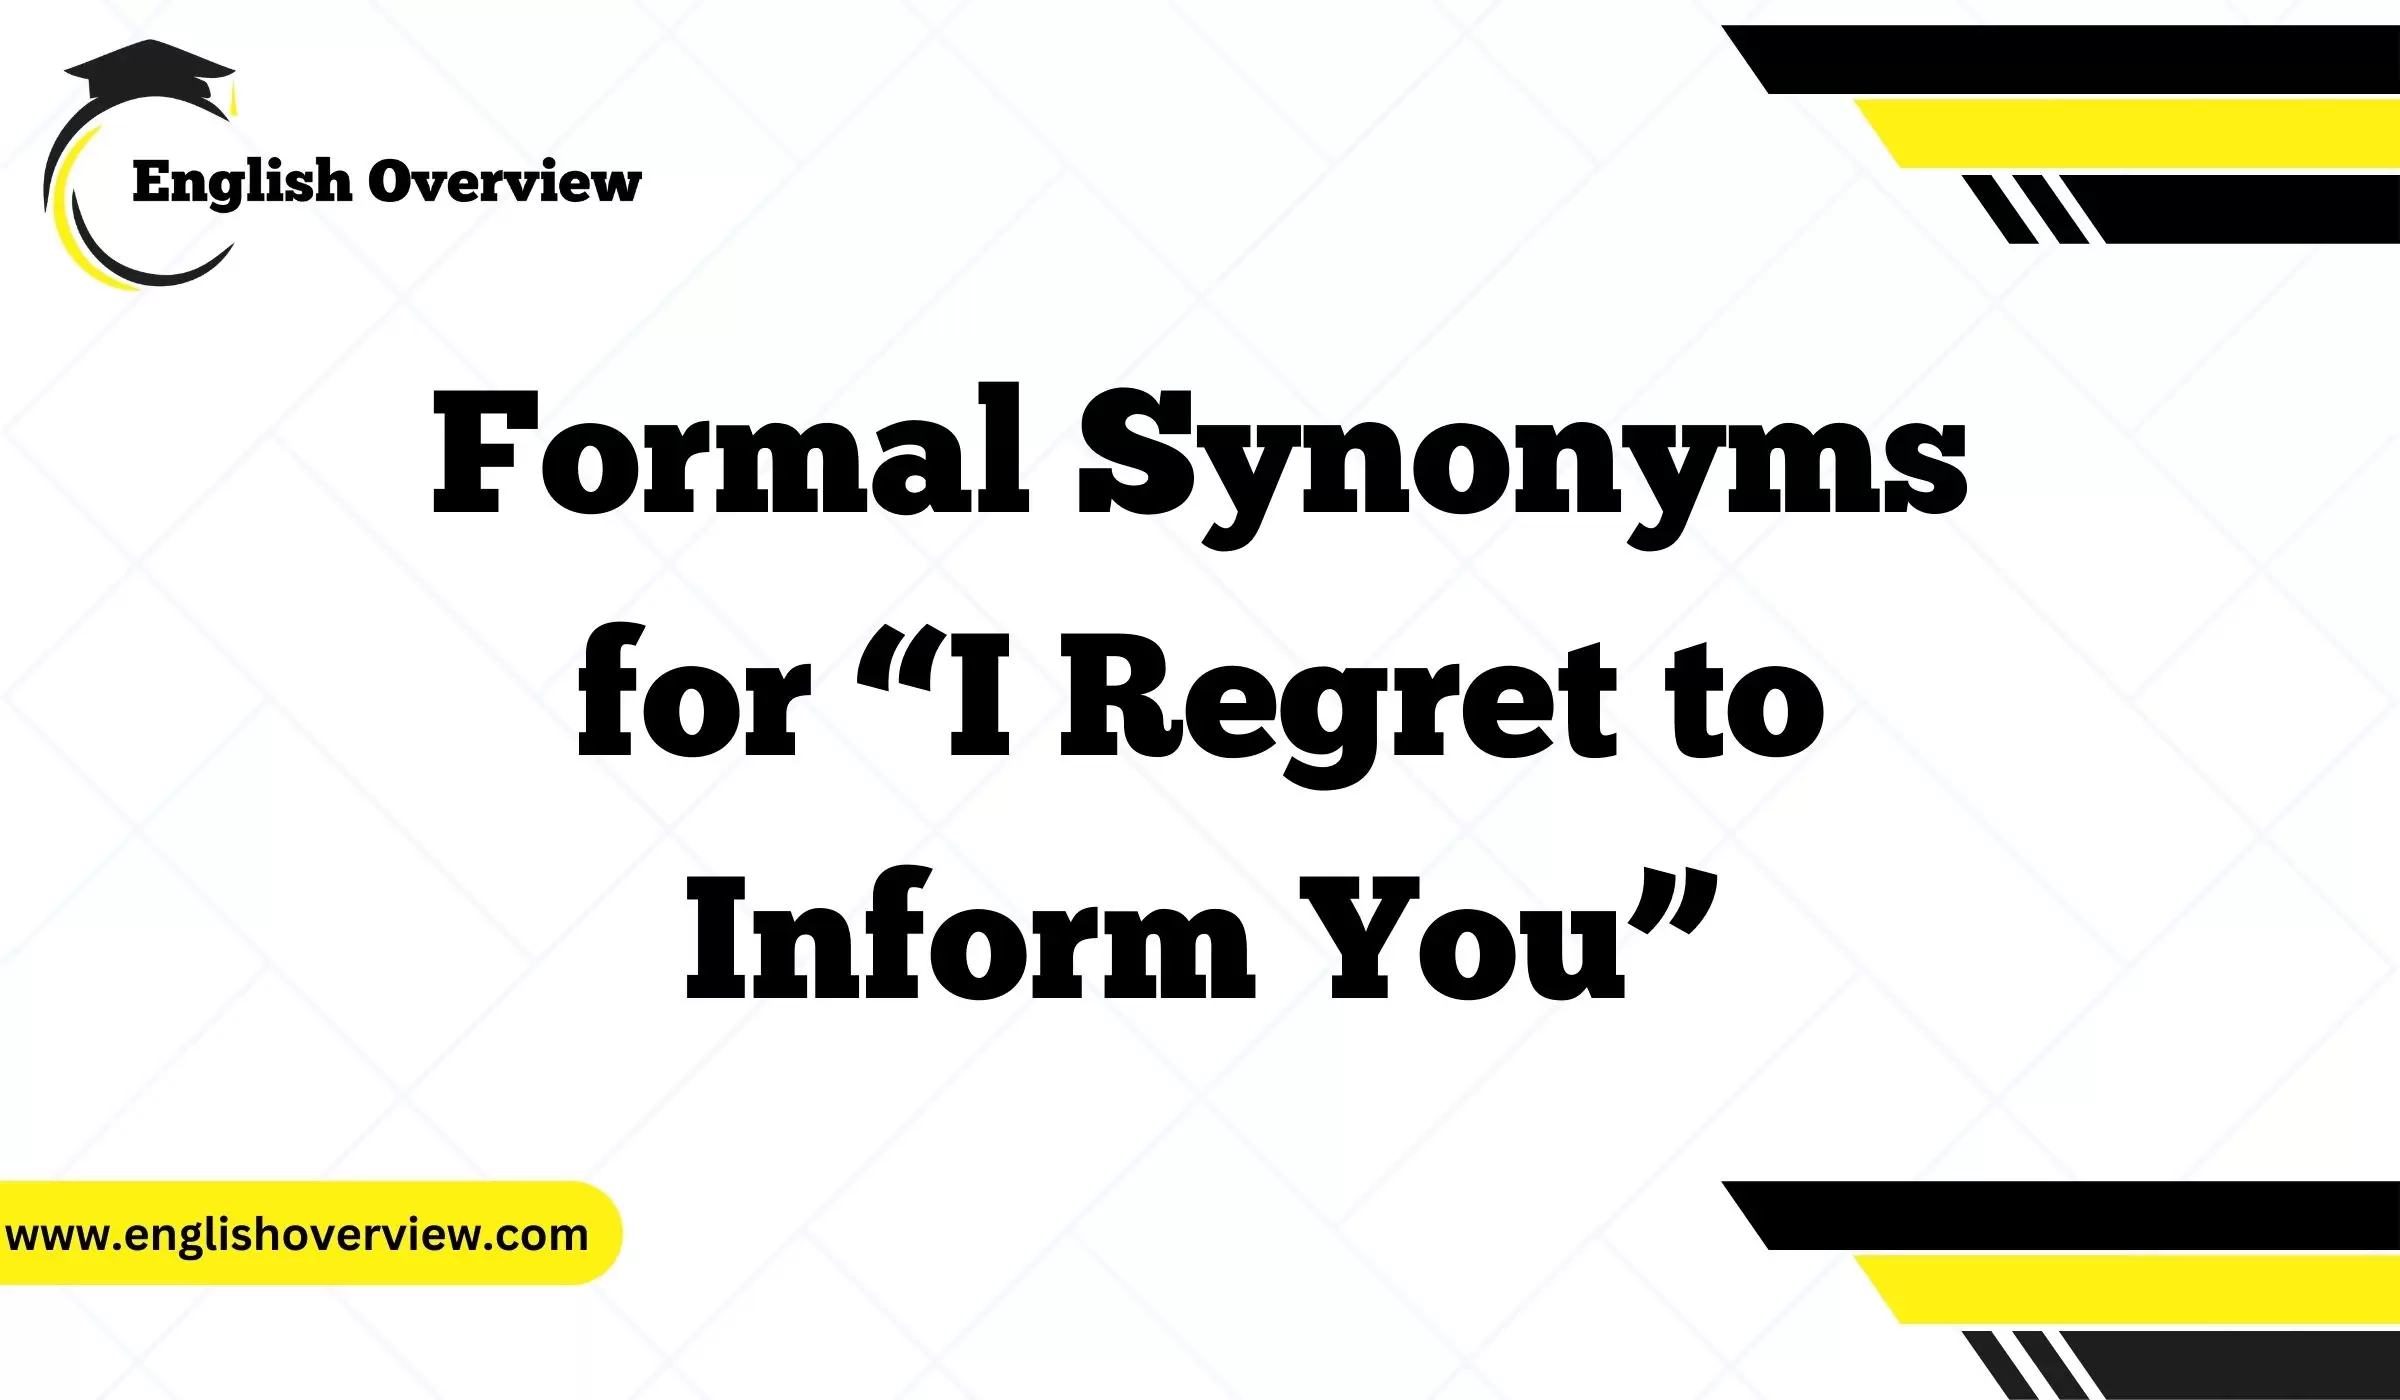 Formal Synonyms for “I Regret to Inform You”